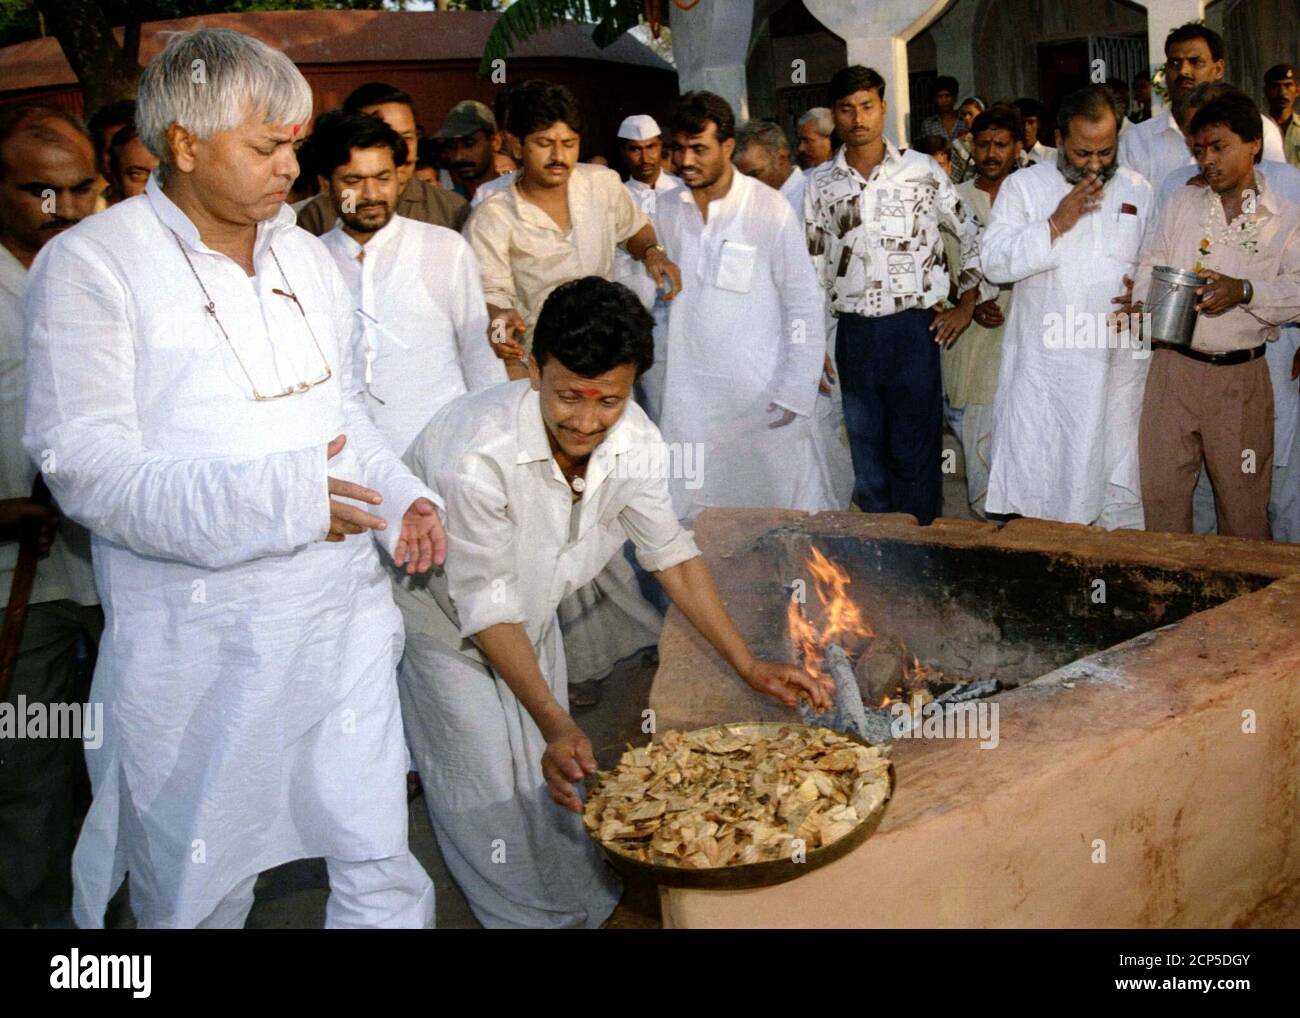 Laloo Prasad Yadav (L), chief minister of the eastern Indian state of Bihar,  offer prayers at a temple in the state capital Patna on June 21. Yadav,  head of Prime Minister Inder